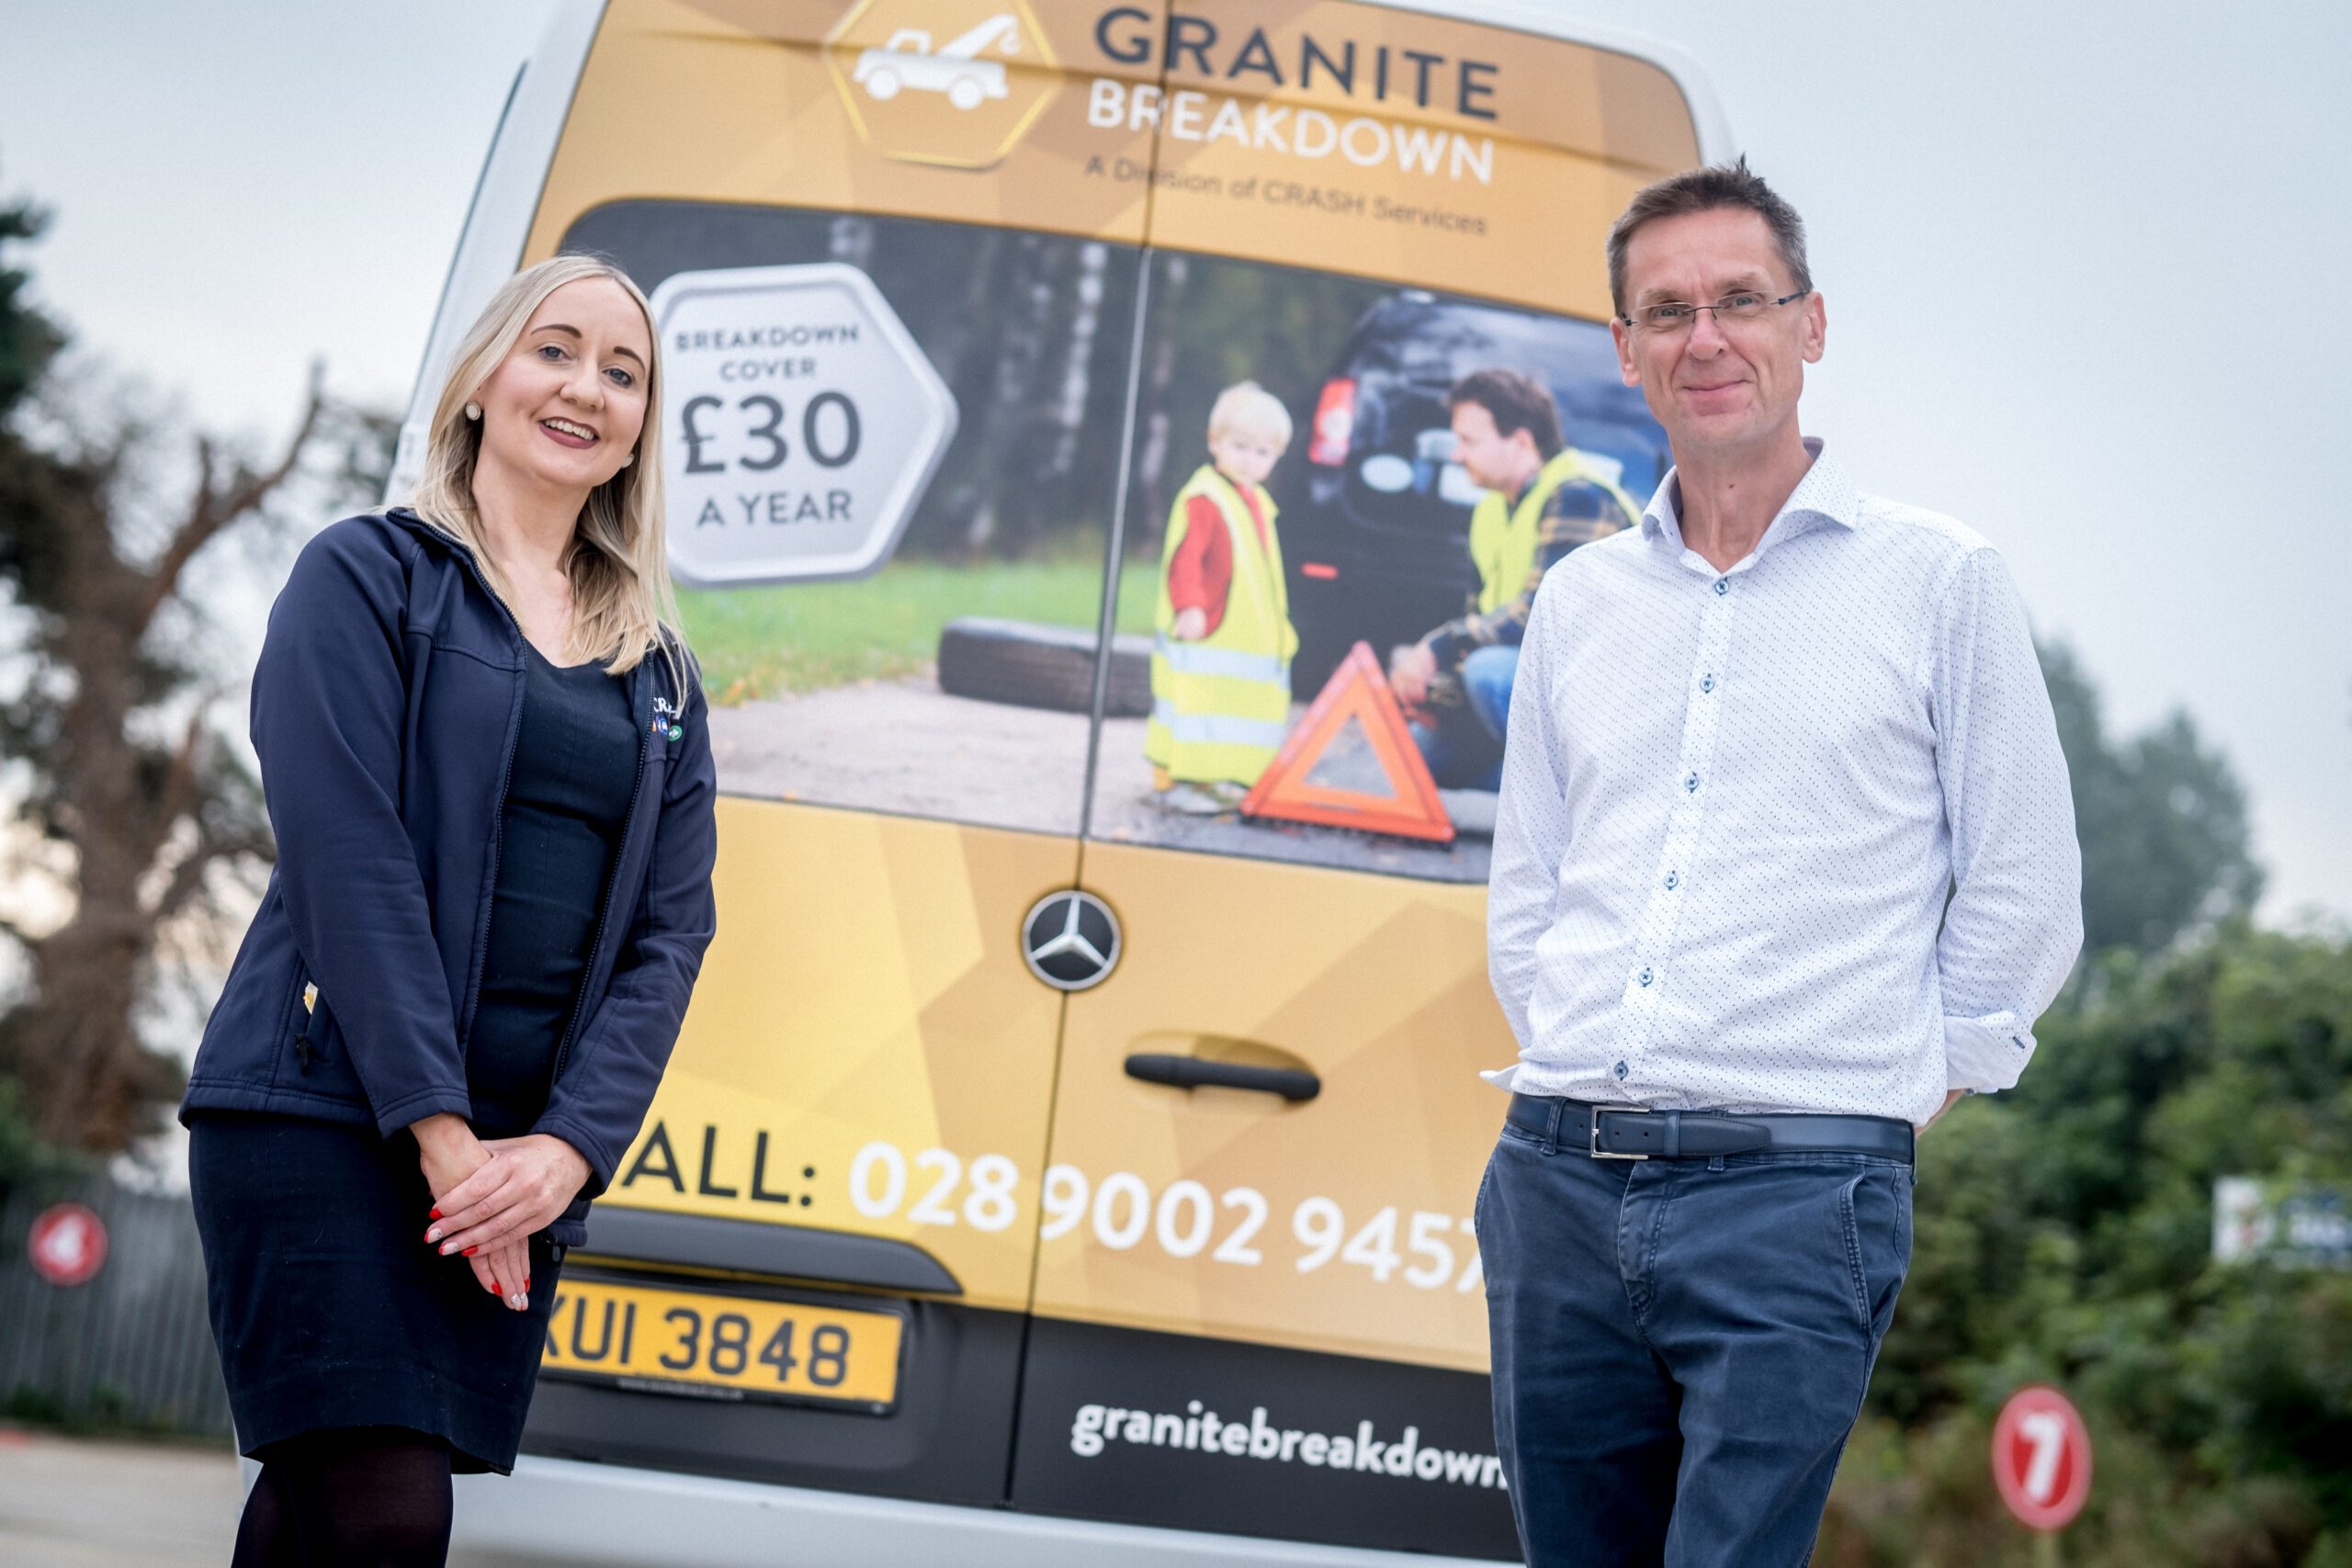 Granite Breakdown team up with Airpoter bus company in Derry